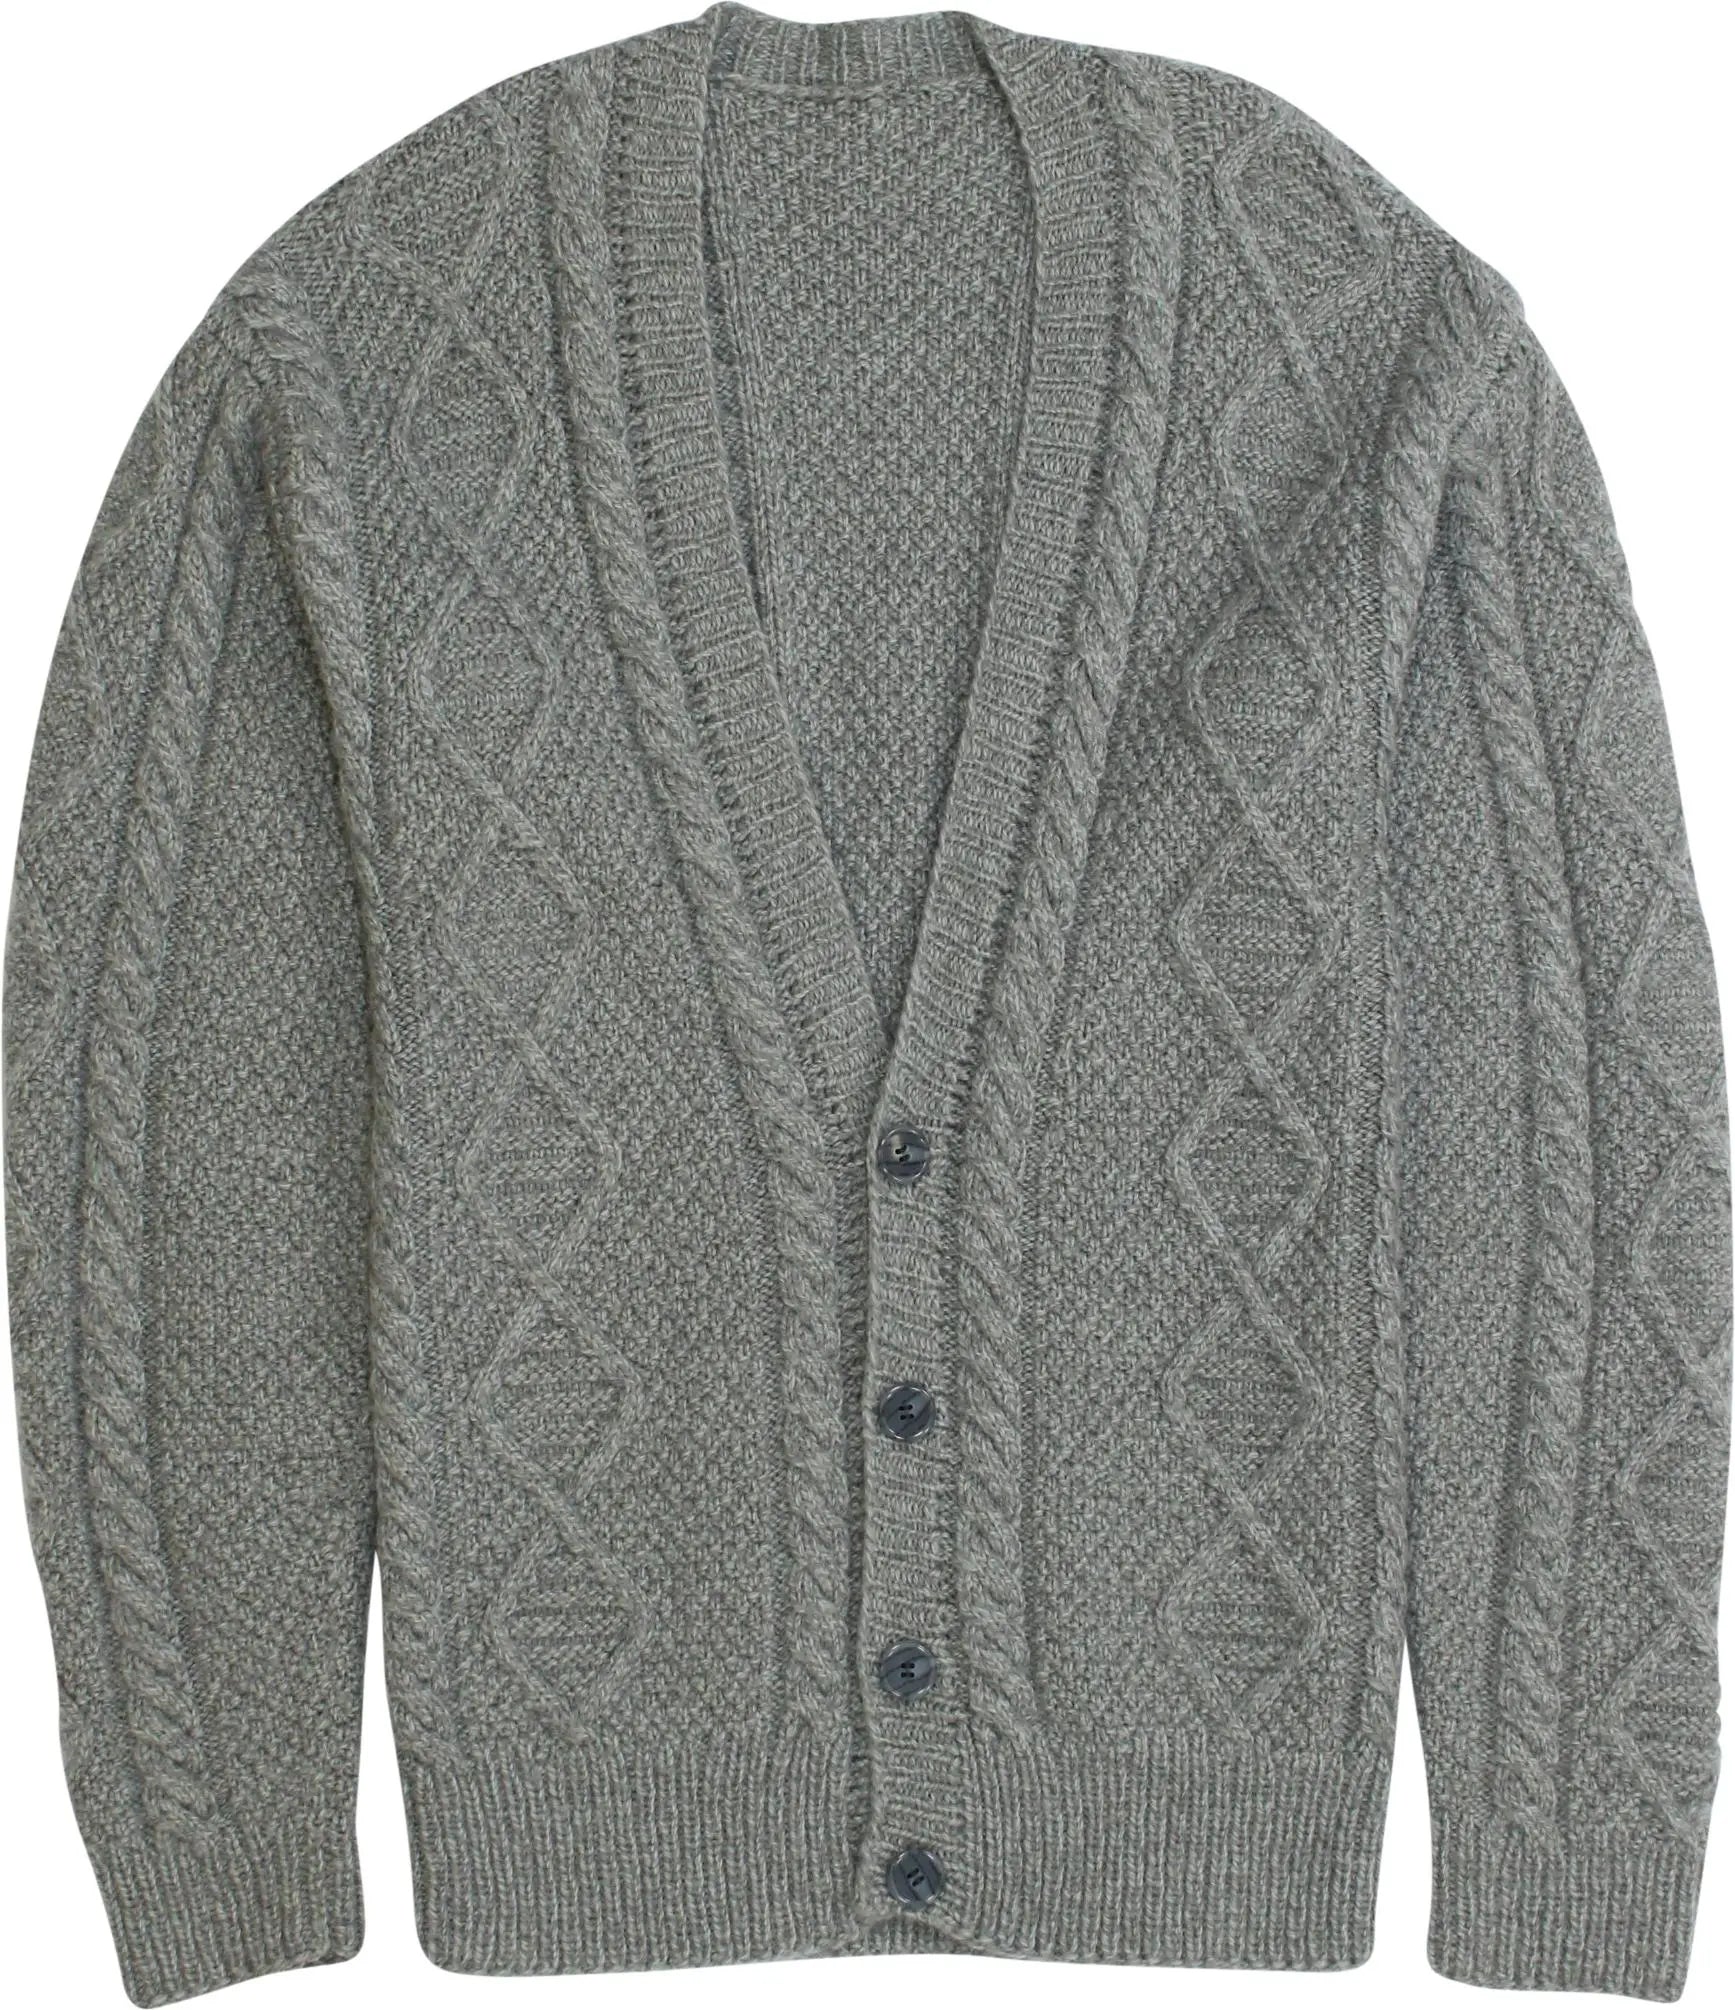 Handmade - Hand Knitted Cardigan- ThriftTale.com - Vintage and second handclothing